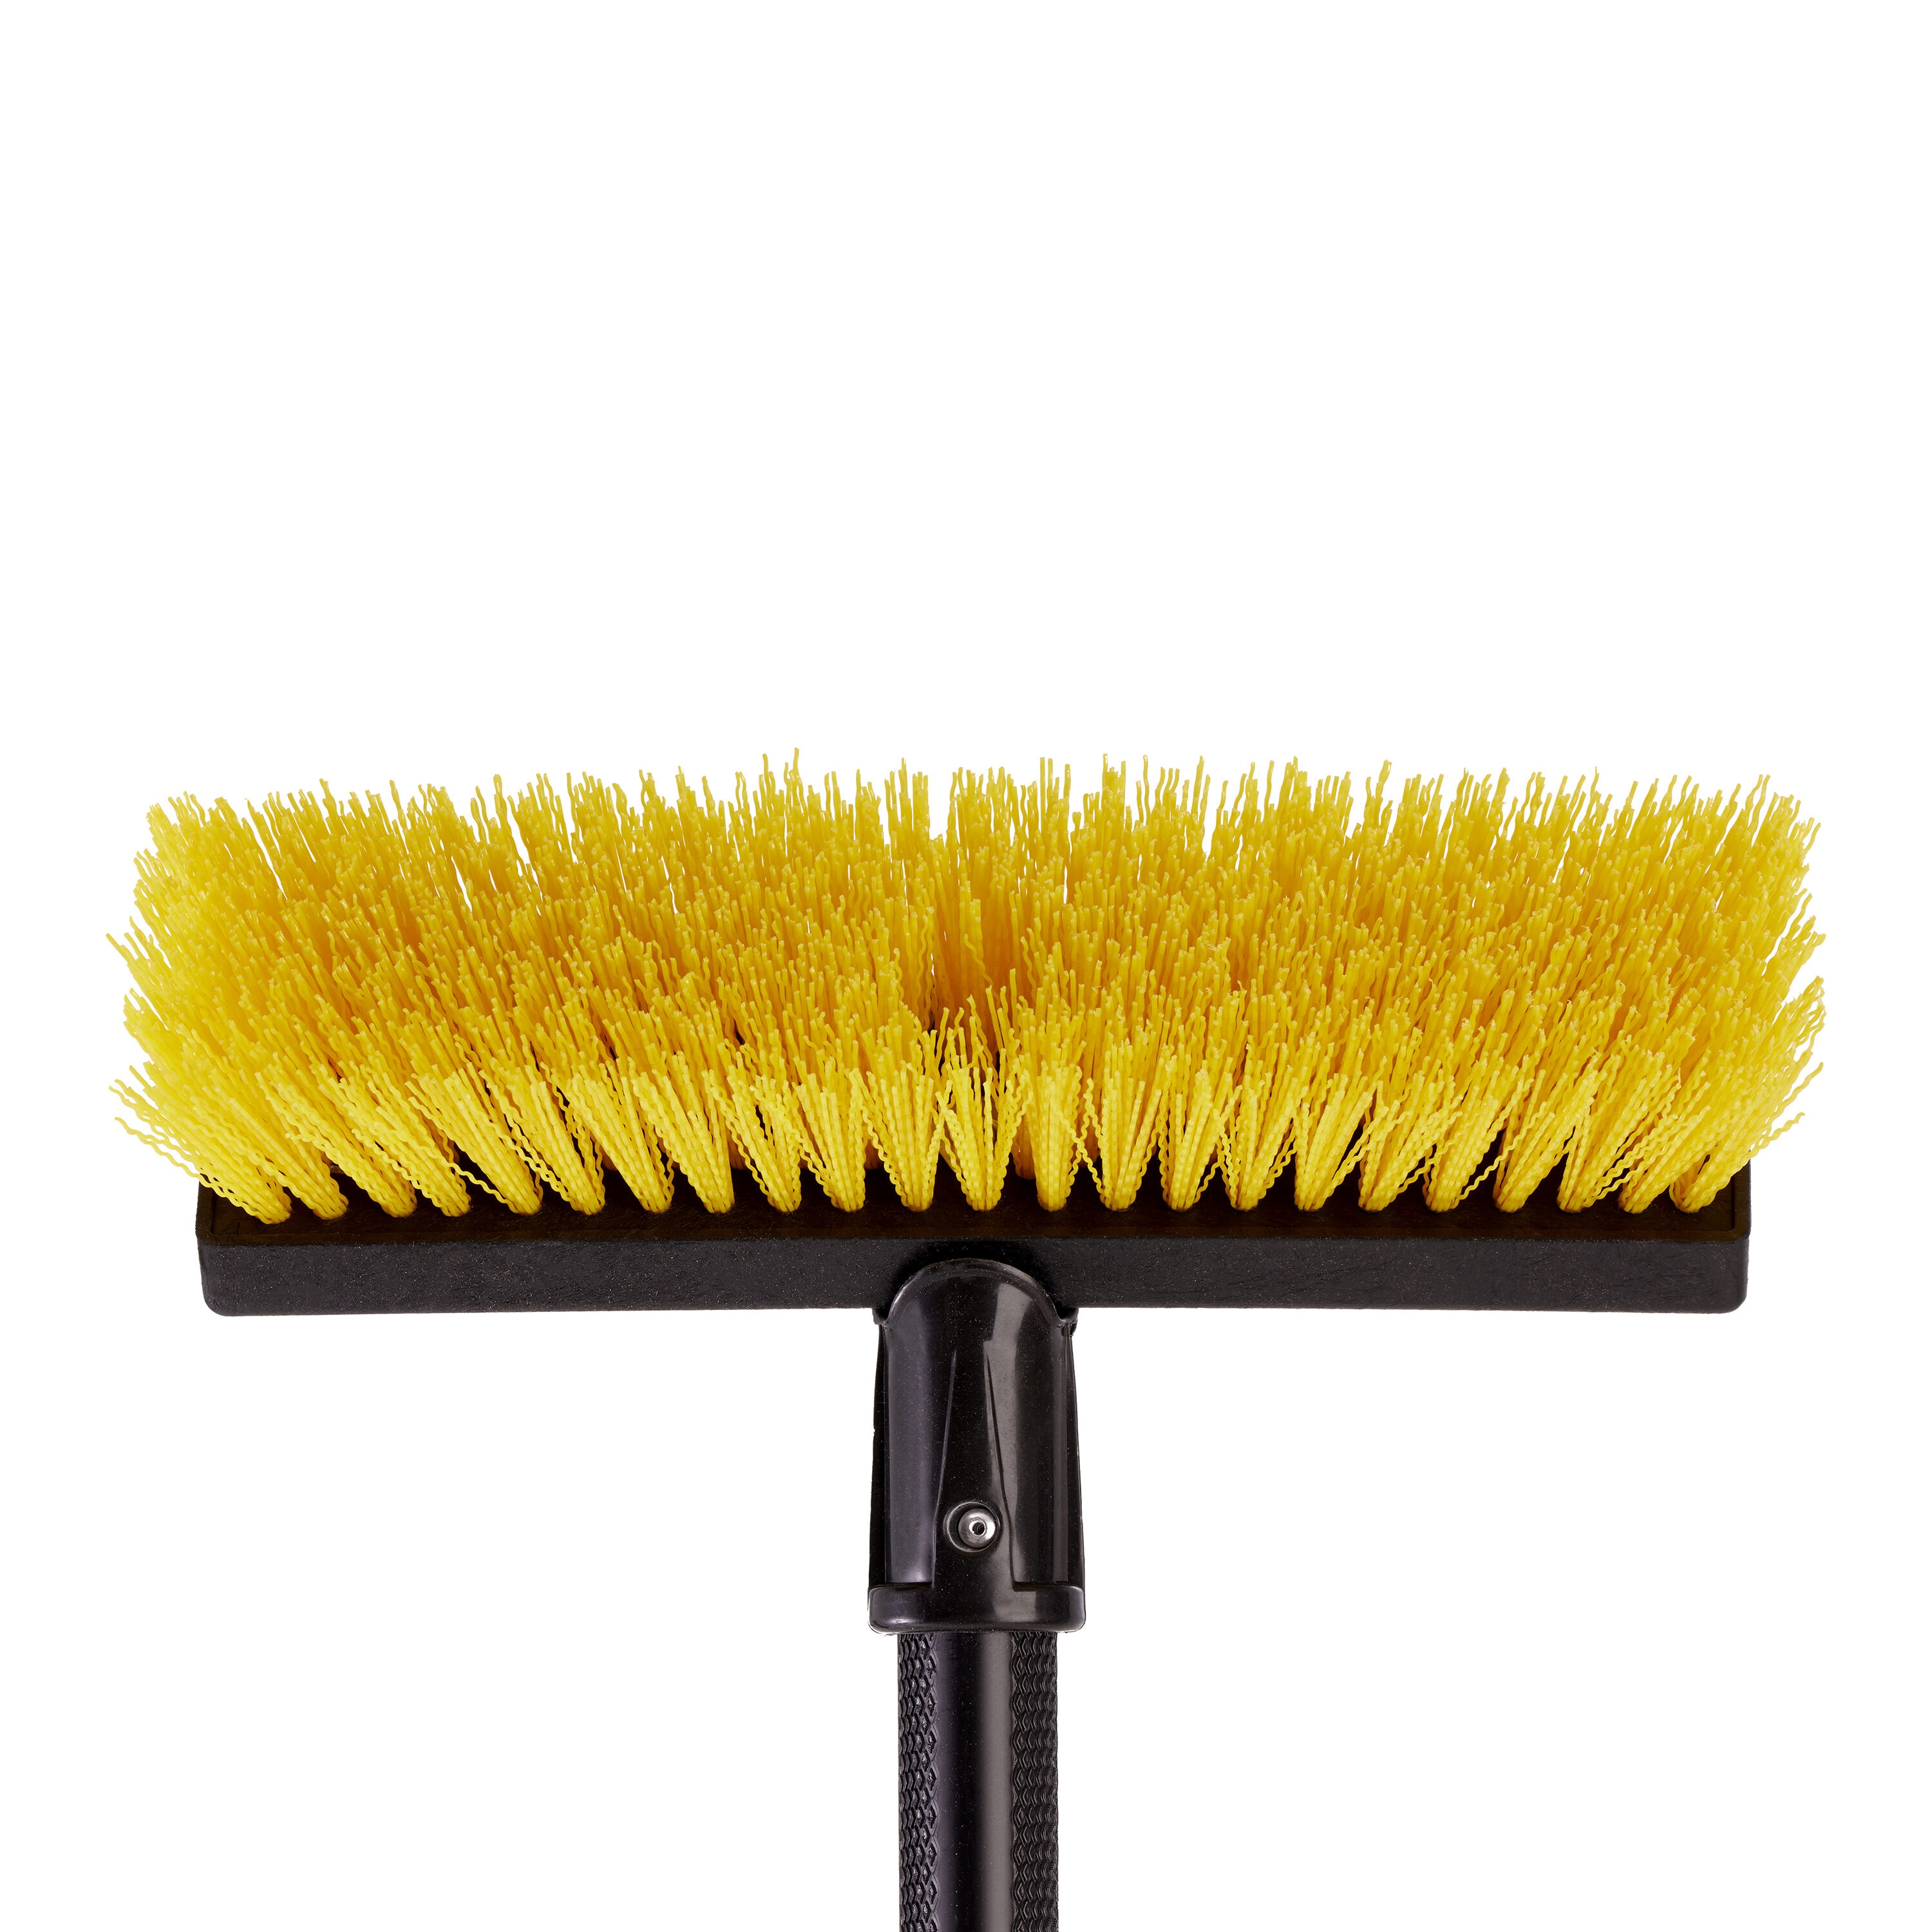 Rubbermaid Heavy Duty All Purpose Scrub Brush for Cleaning Bathroom,  Shower, Decks, Floor, Tile, Grout and Concrete